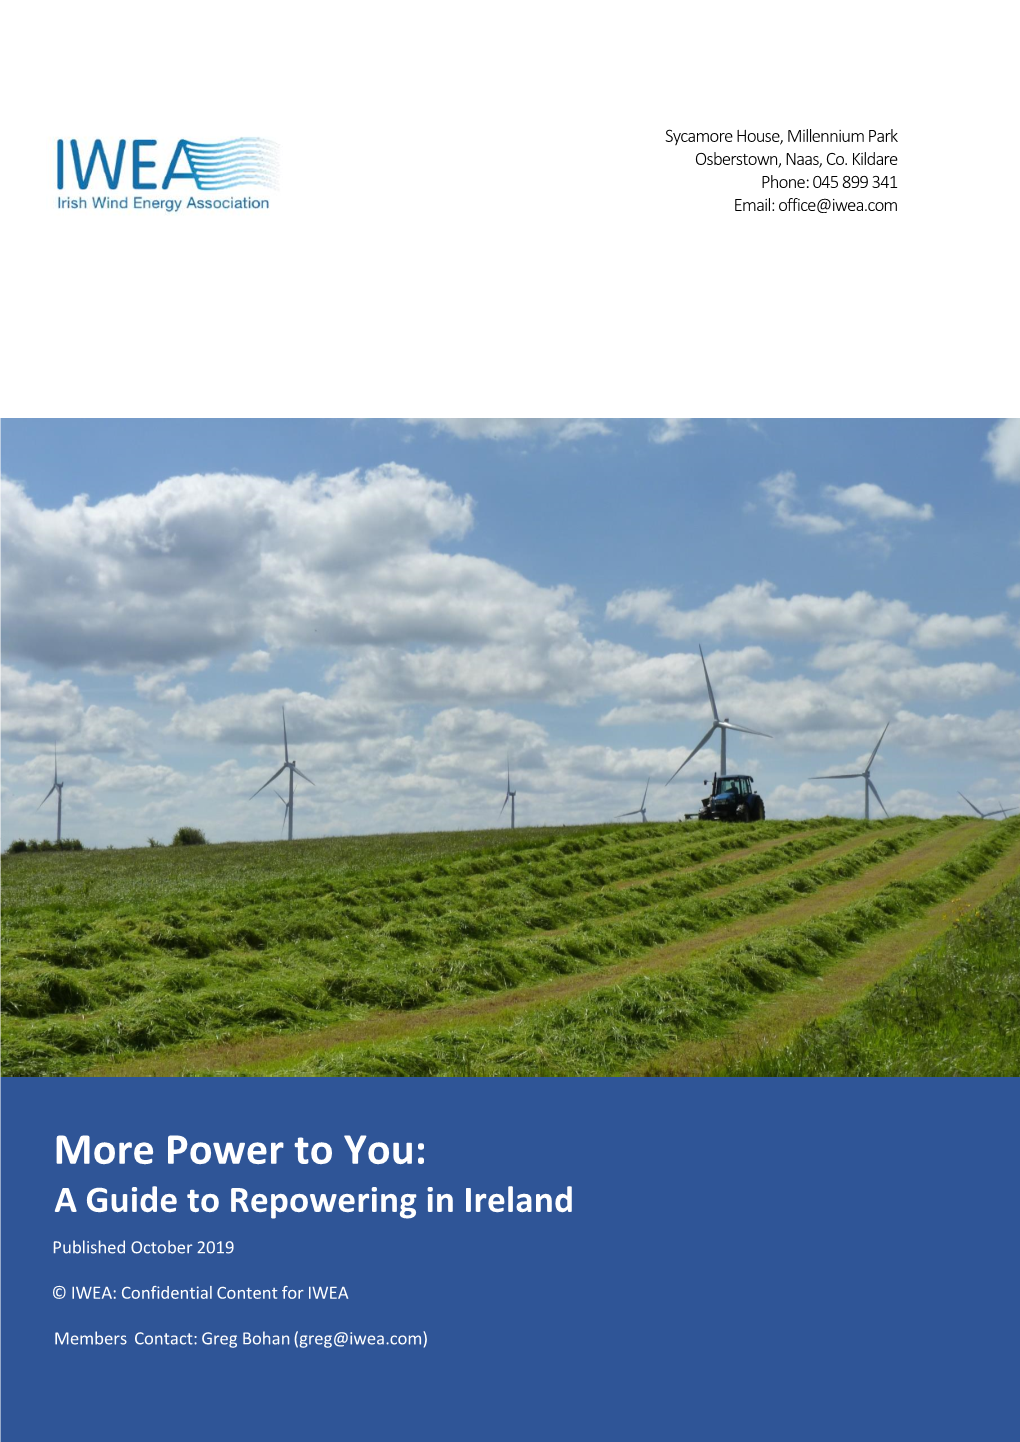 More Power to You: a Guide to Repowering in Ireland Published October 2019